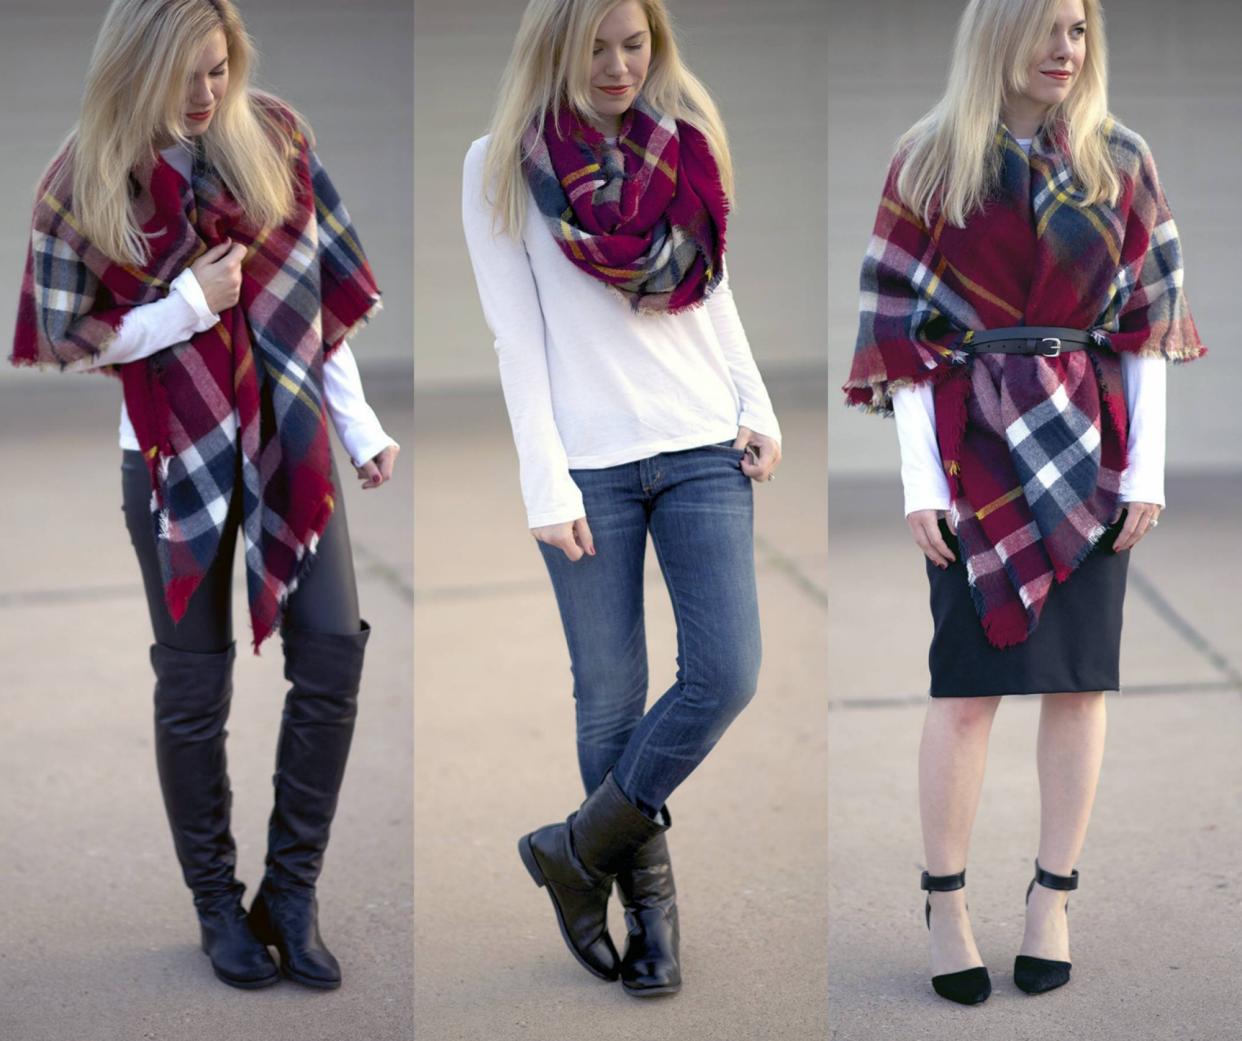 3 ways to style a scarf